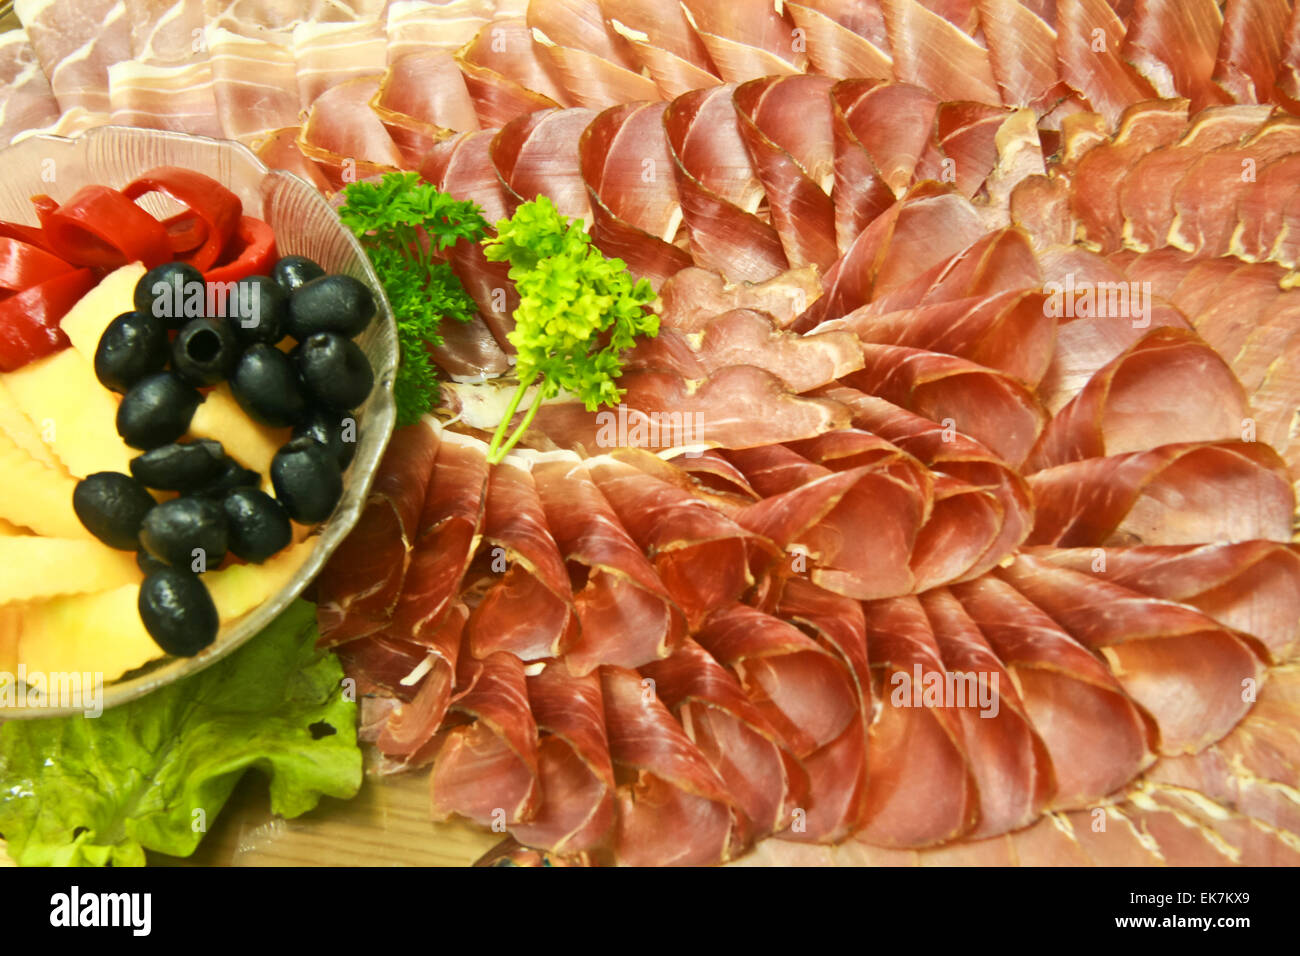 Meat cuts Stock Photo